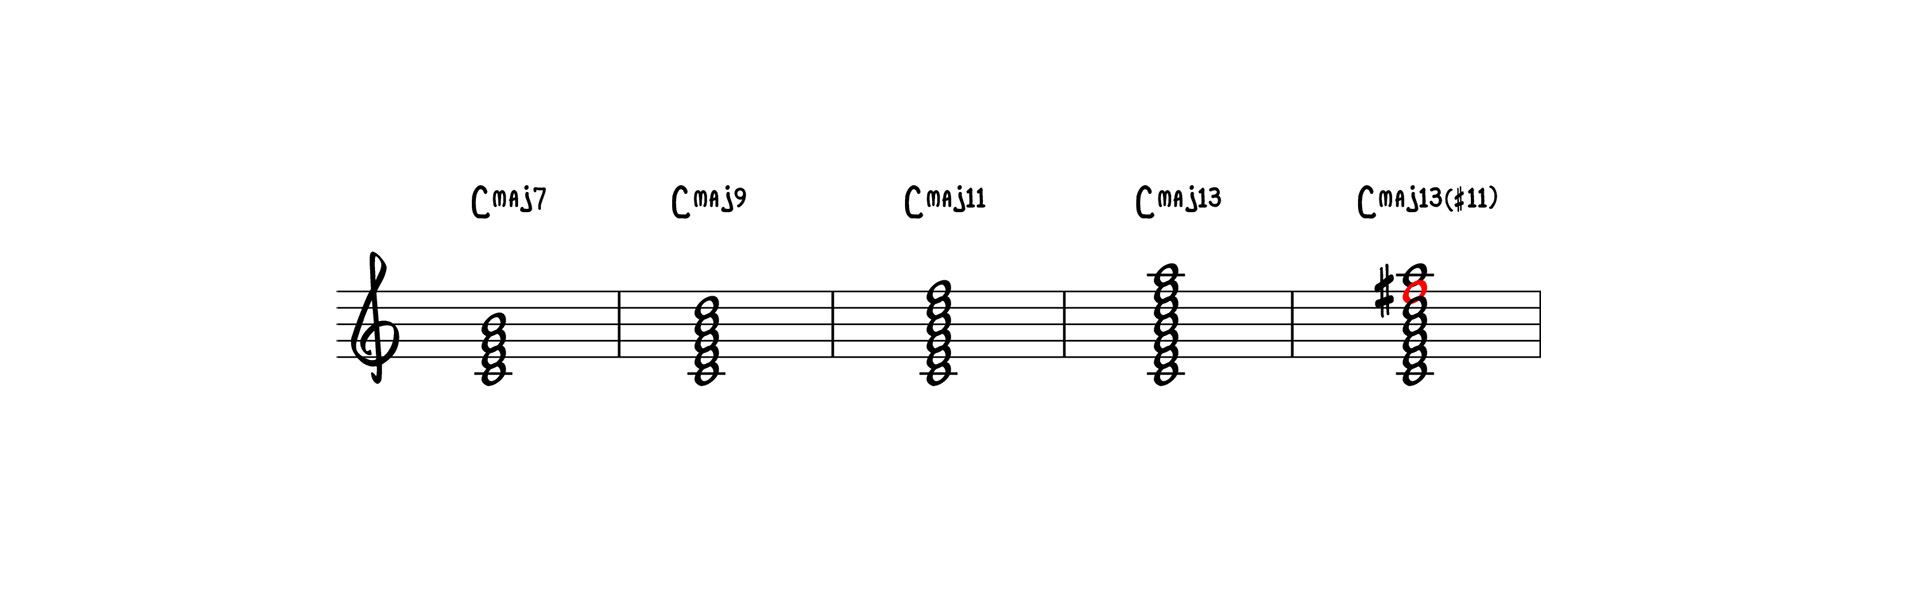 Chord Extensions 9, 11, 13